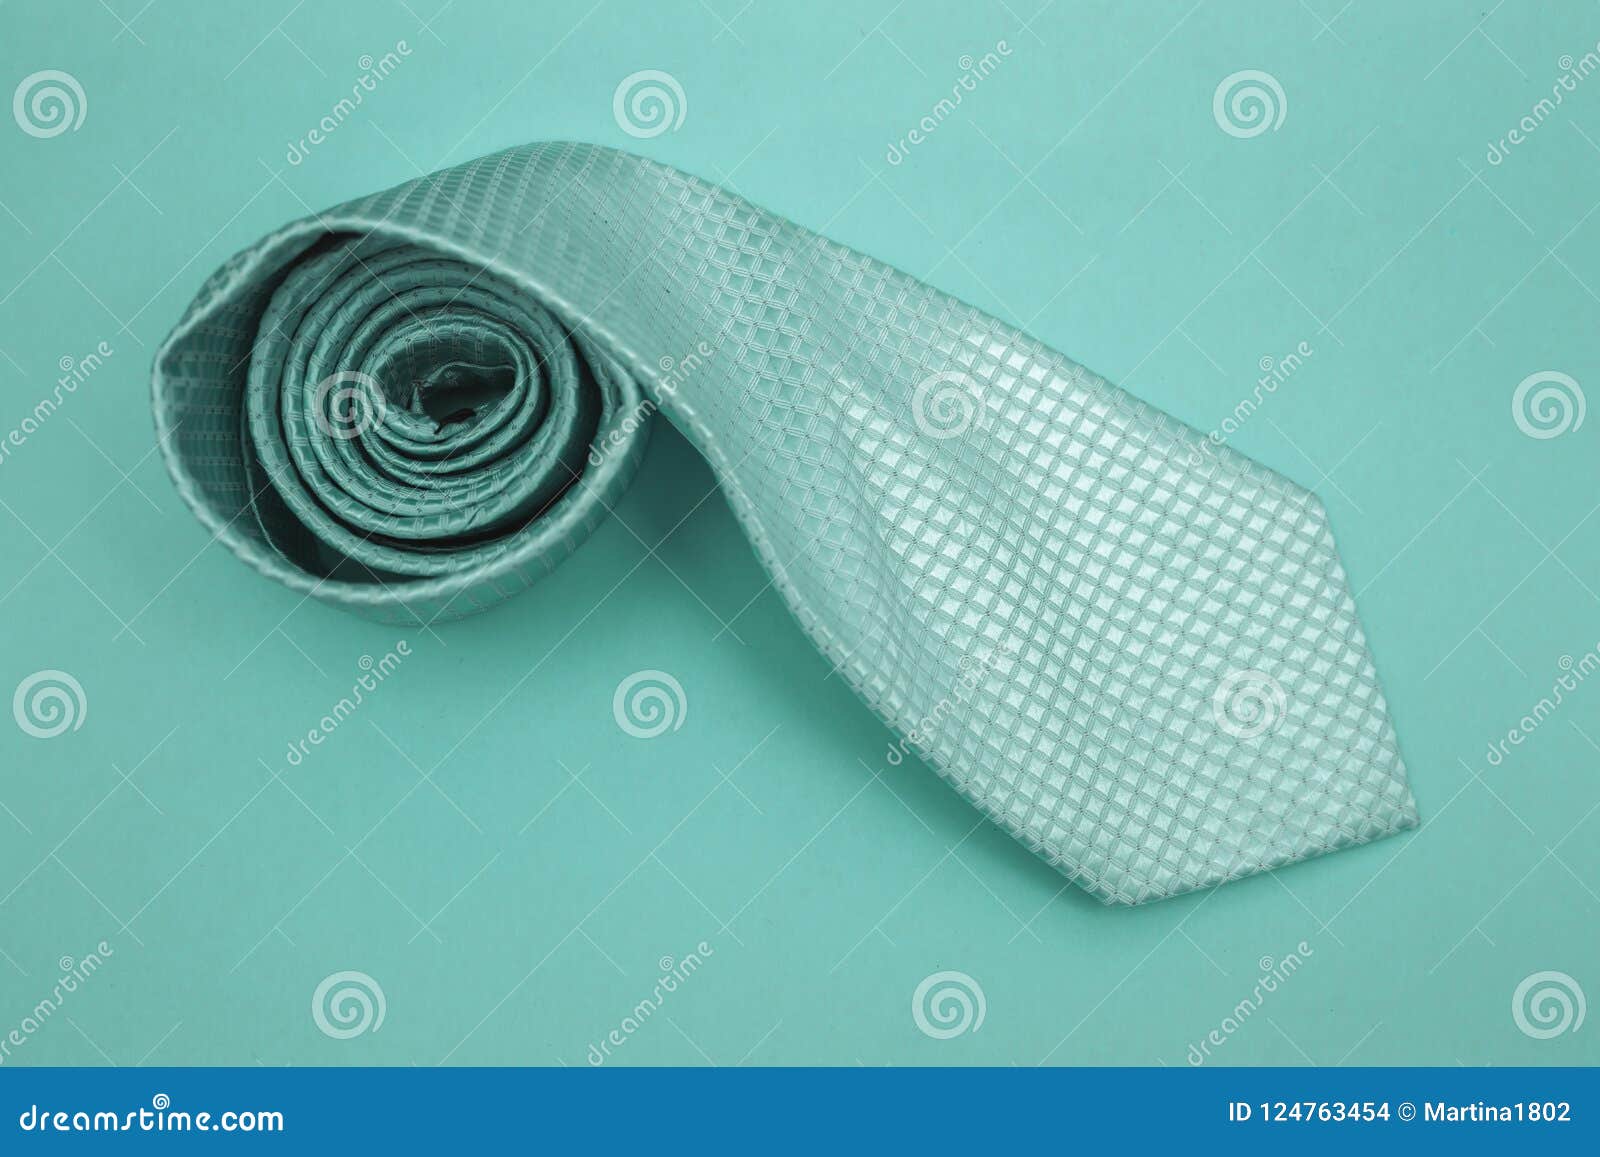 Men`s Clothes and Accessories. Stylish Blue Tie Stock Photo - Image of ...